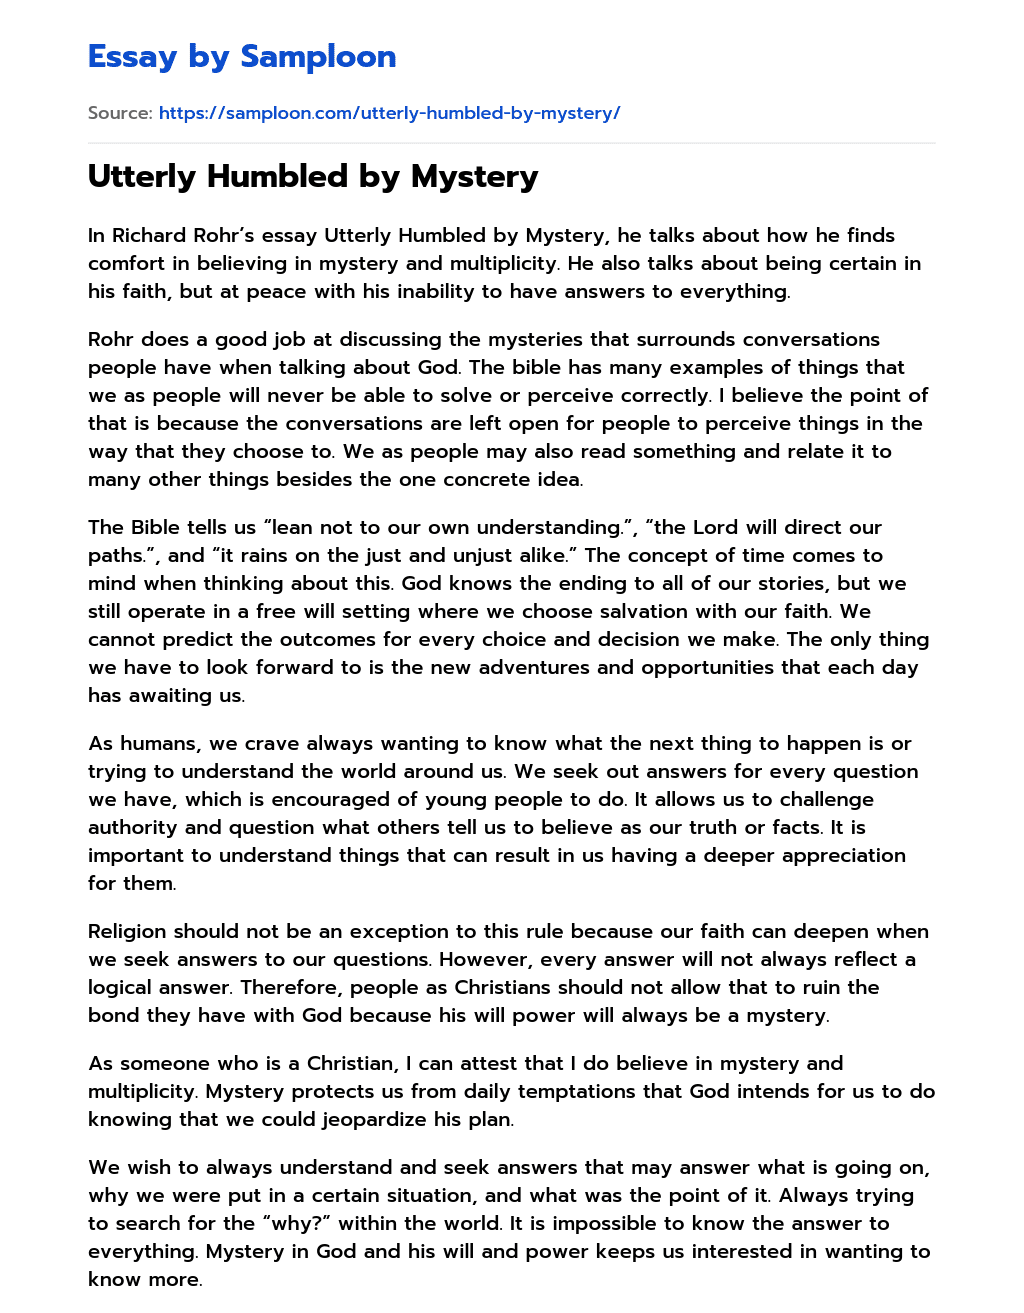 Utterly Humbled by Mystery essay